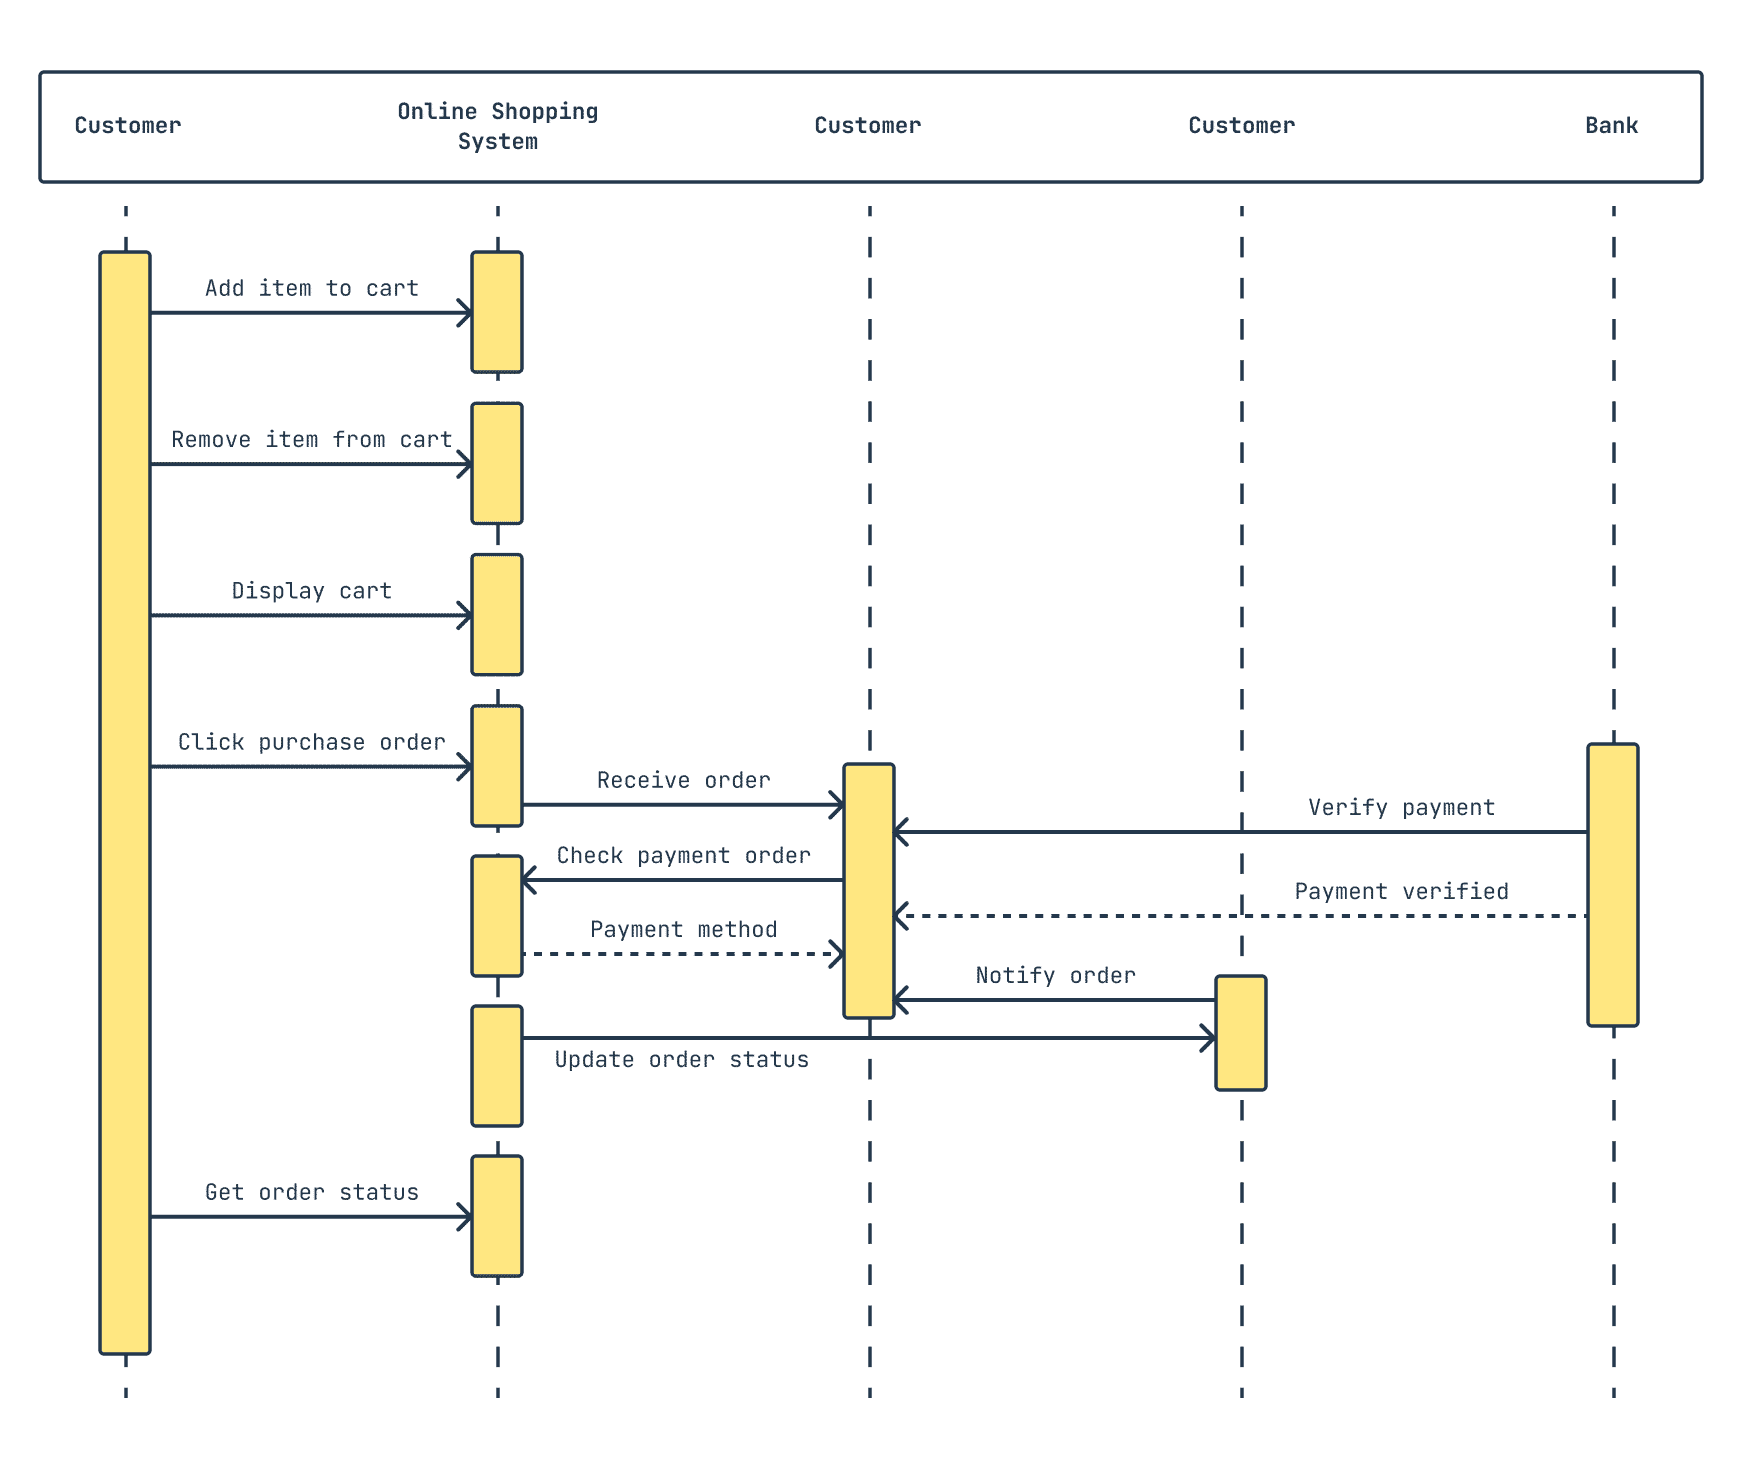 A sequence diagram of online shopping